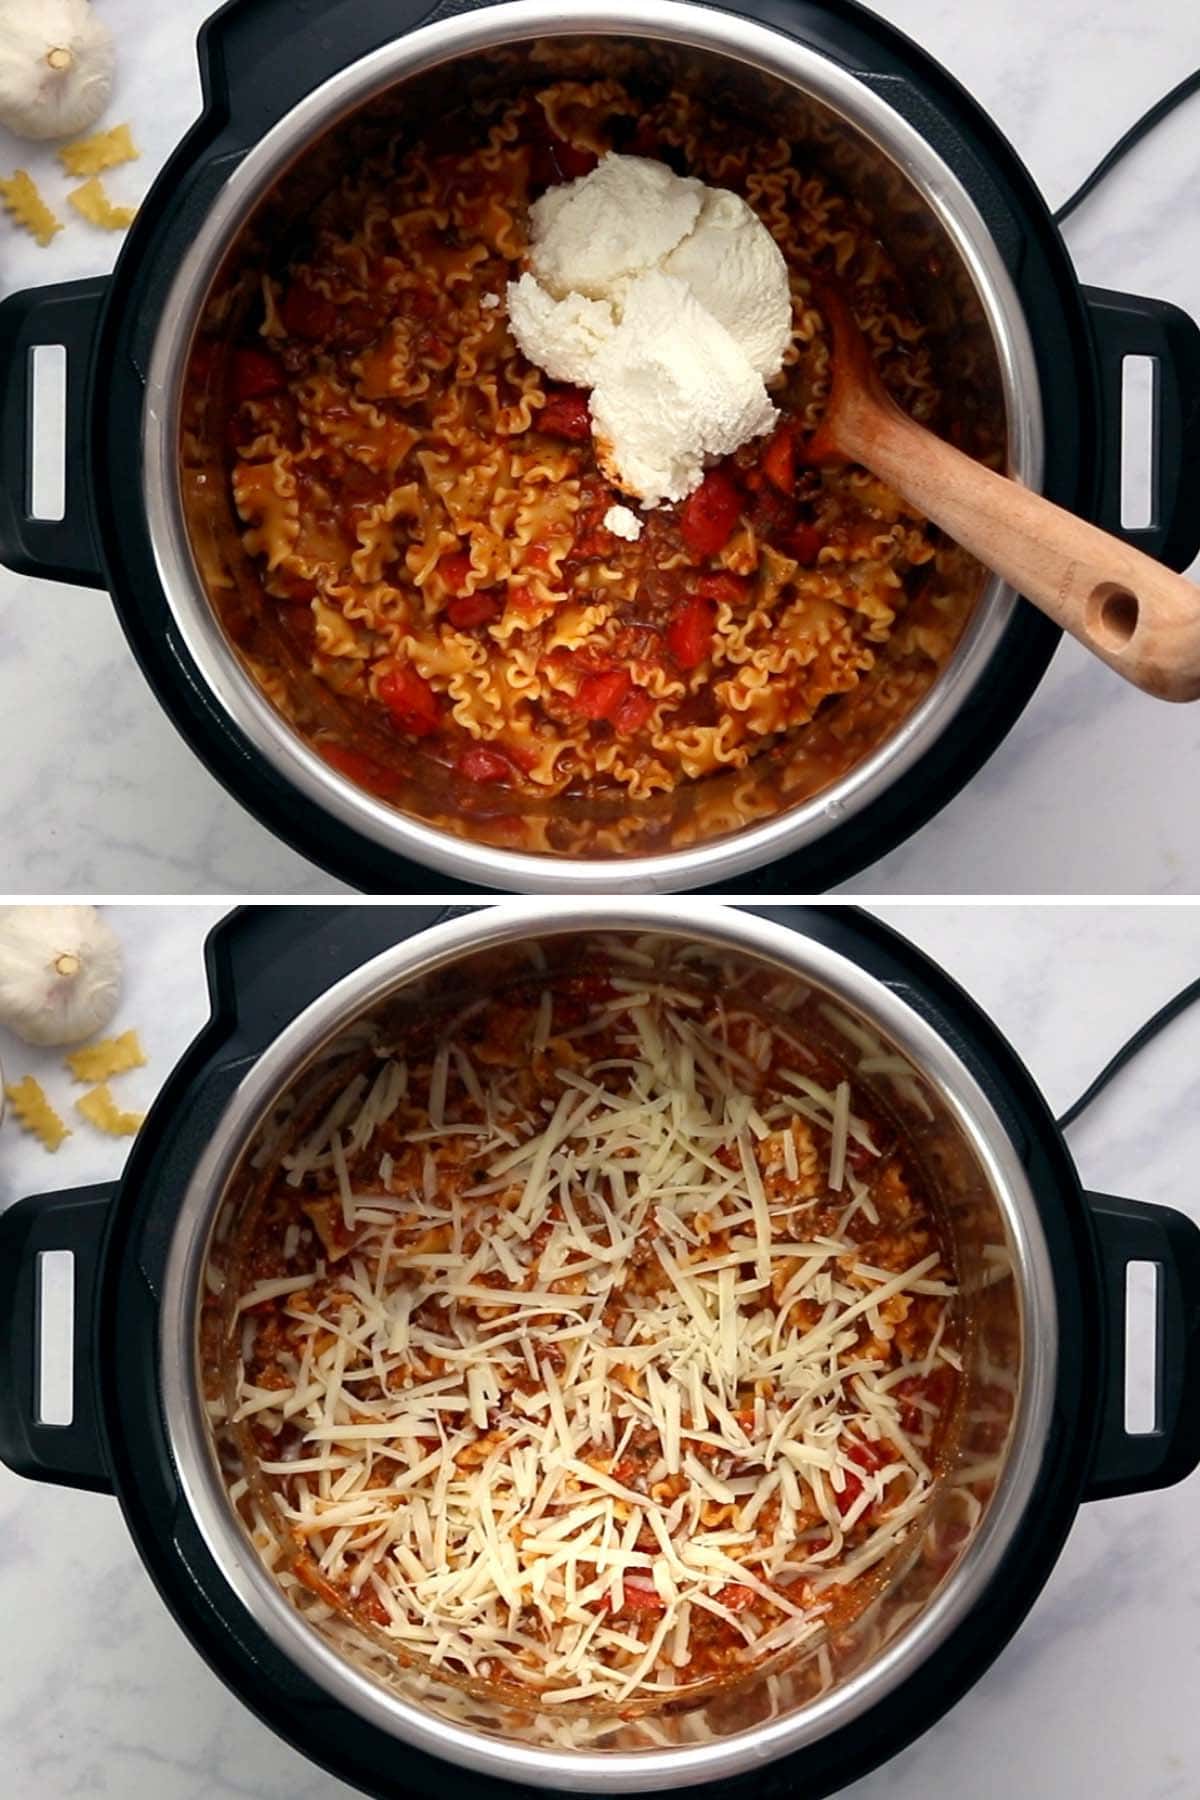 Process photos of how to make Instant Pot Lazy Lasagna, showing mixing in ricotta cheese and topping with mozzarella.